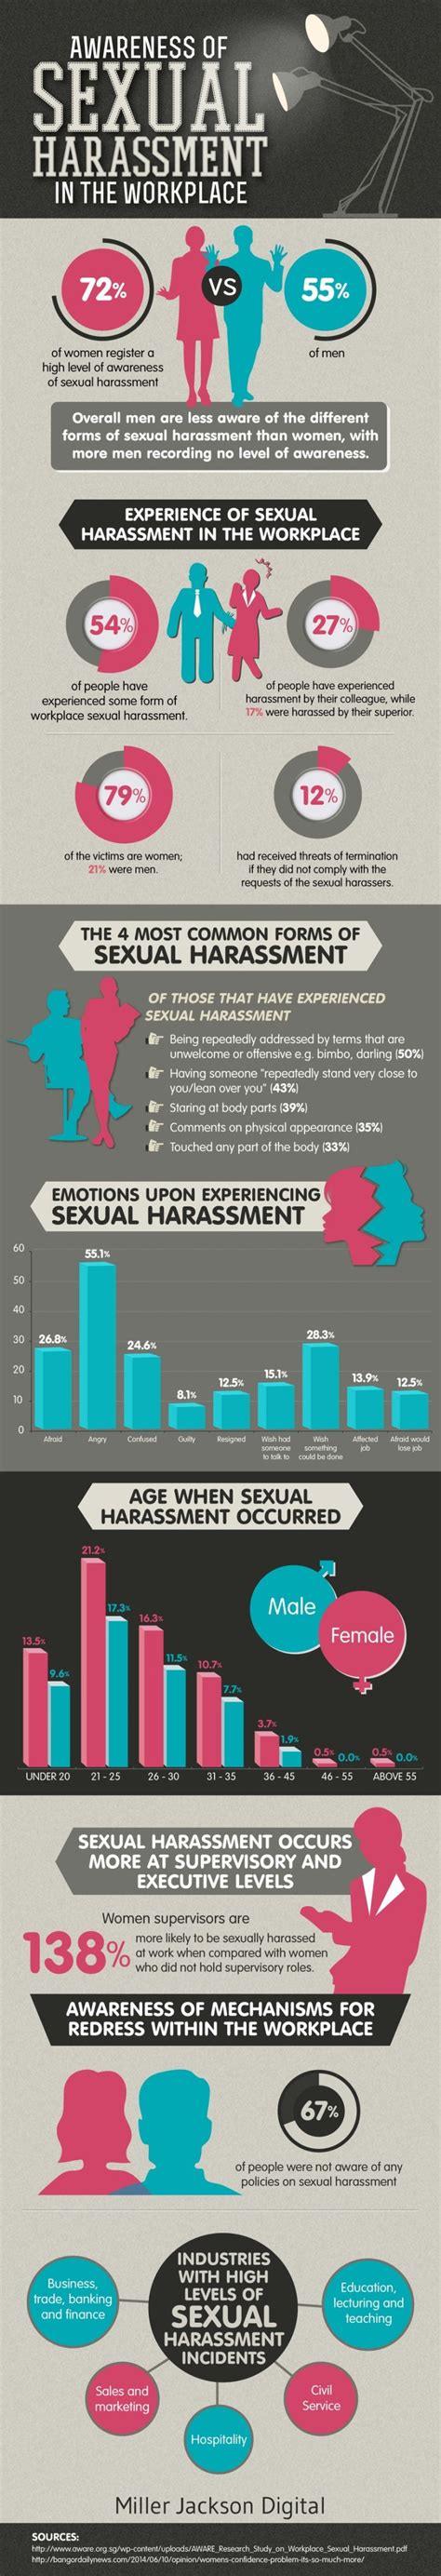 sexual harassment within the workplace